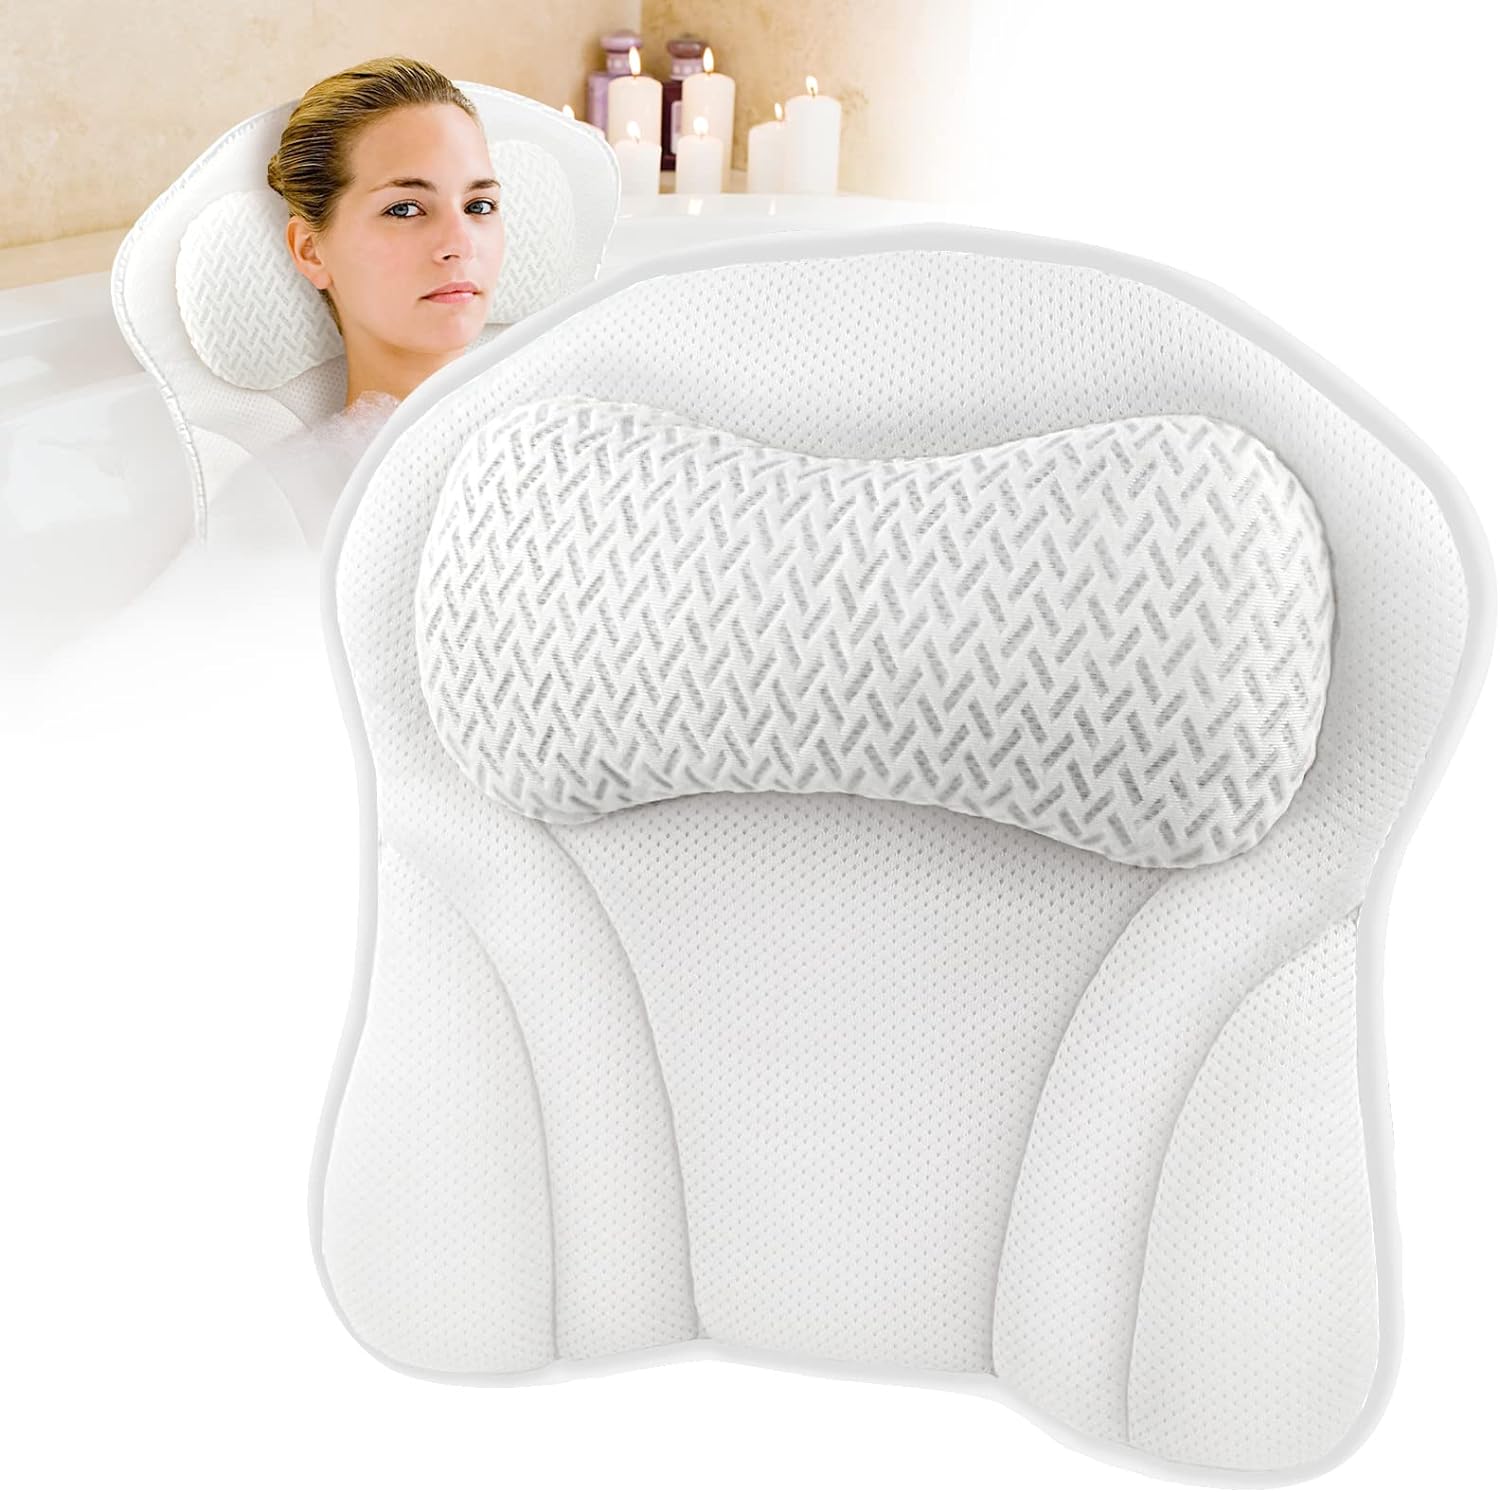 3D Mesh Bath Pillow Spa Pillow Head Rest for Hot Tub Bathtub with 6 Suction Cup 